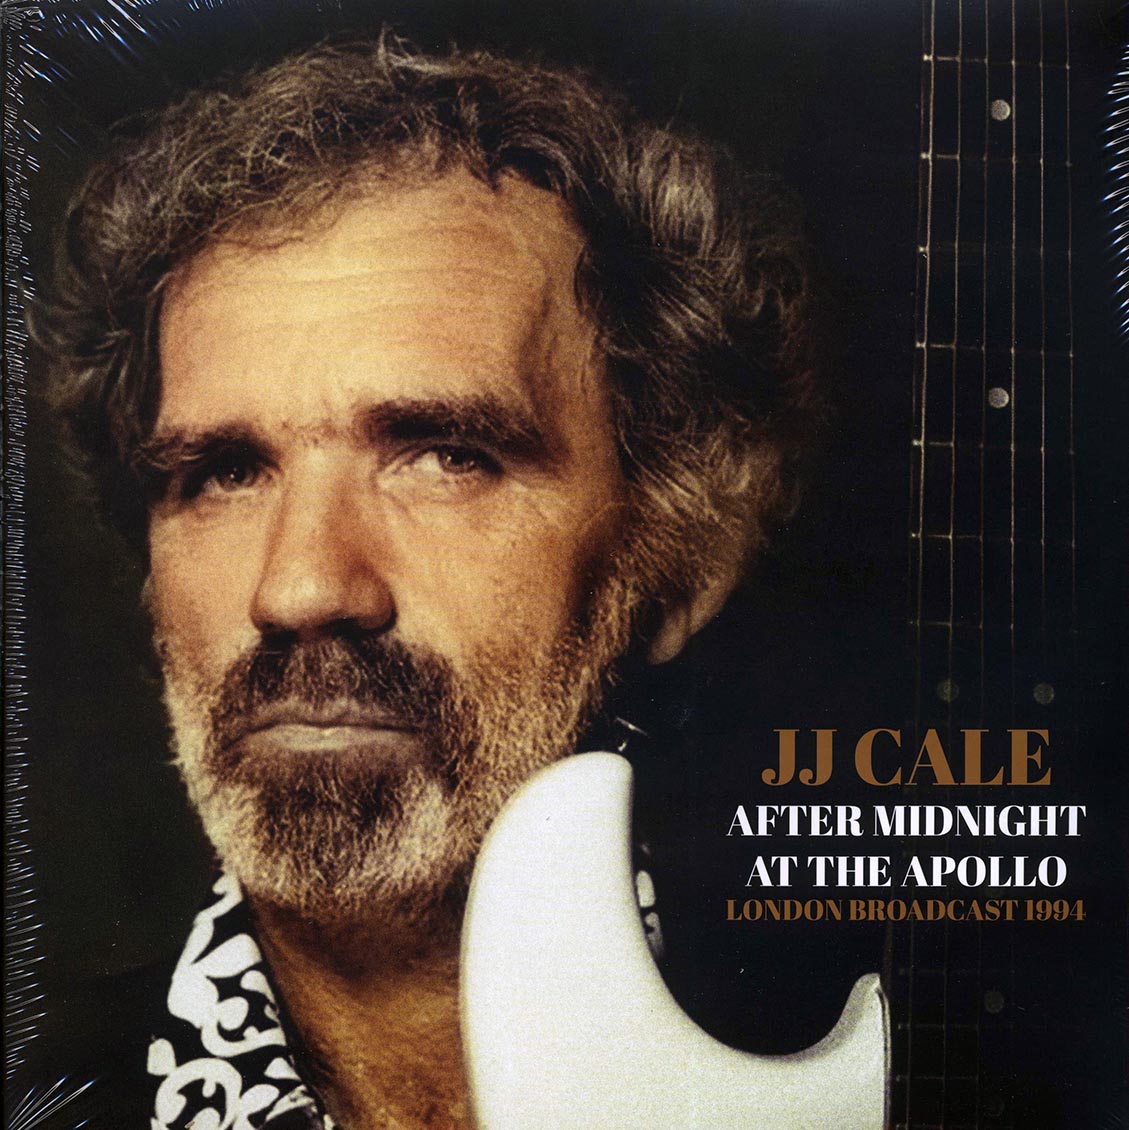 JJ Cale - After Midnight At The Apollo: London Broadcast 1994 (2xLP) - Vinyl LP